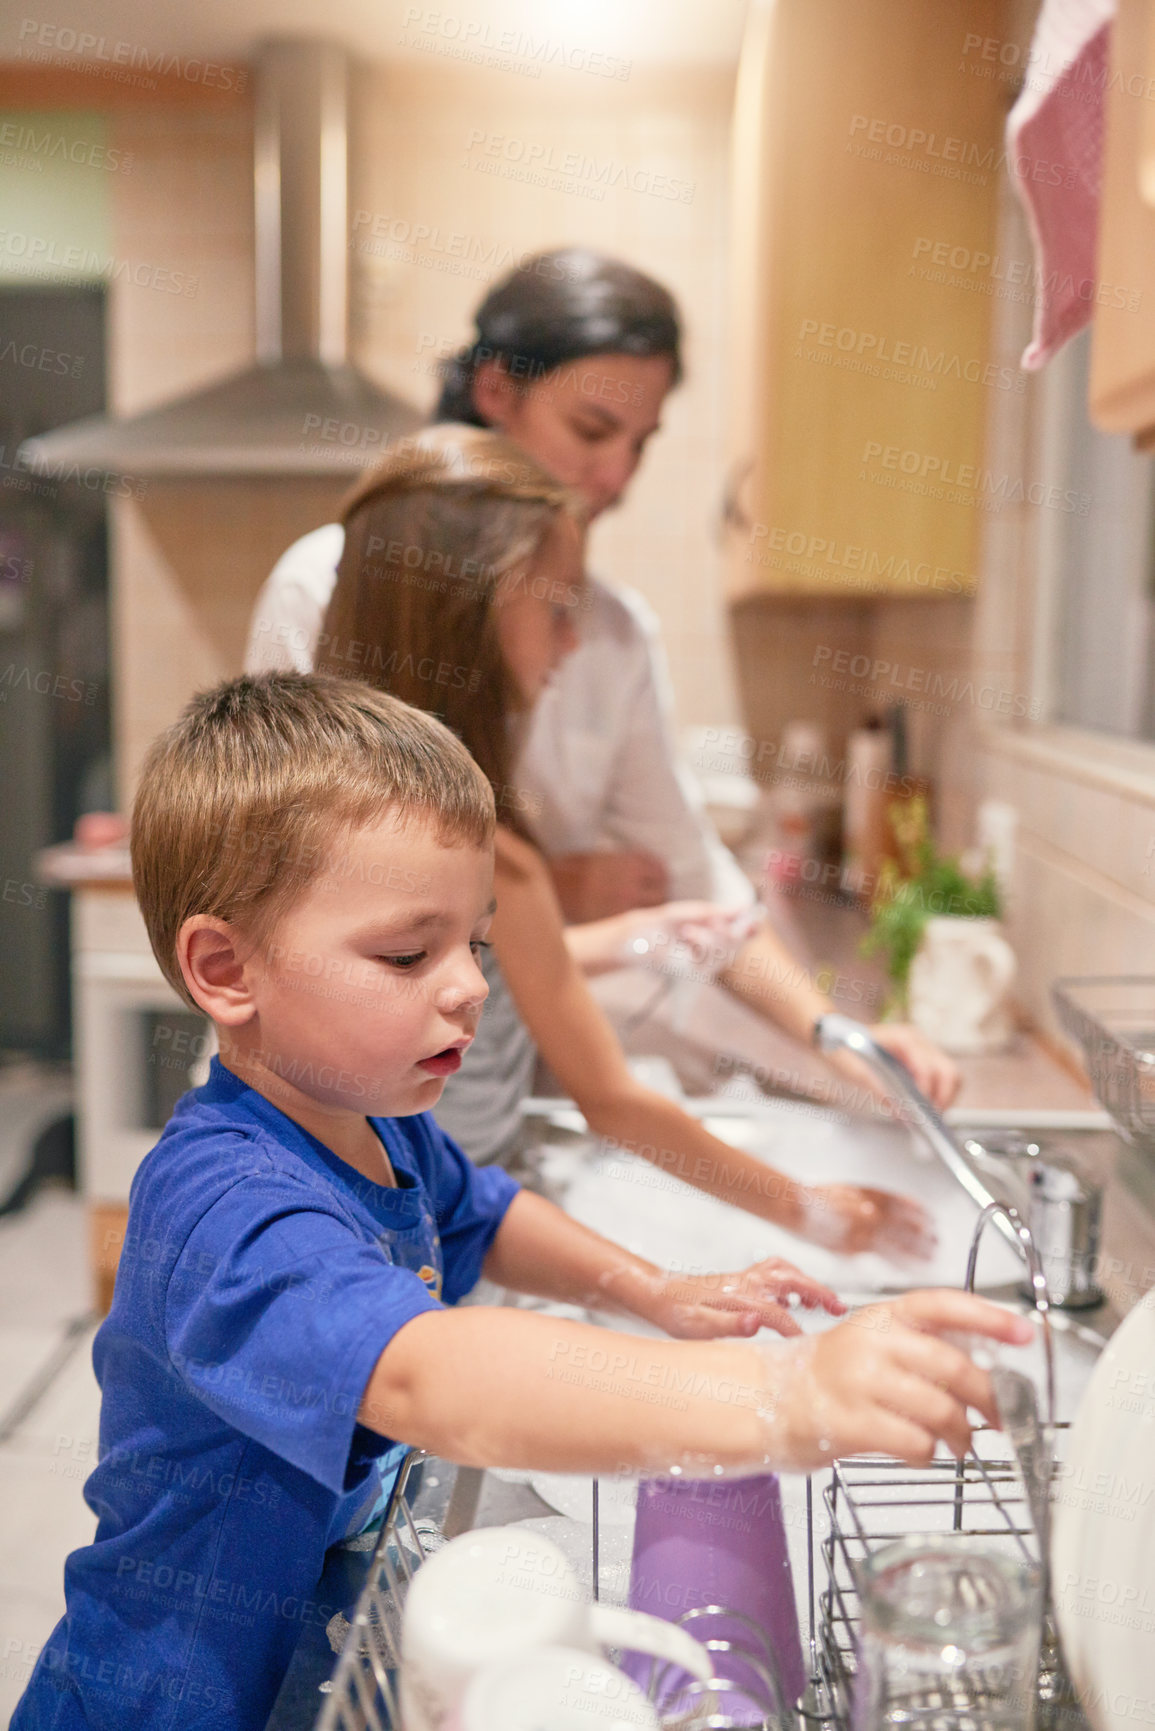 Buy stock photo Shot of a little boy washing dishes with his family at a kitchen sink